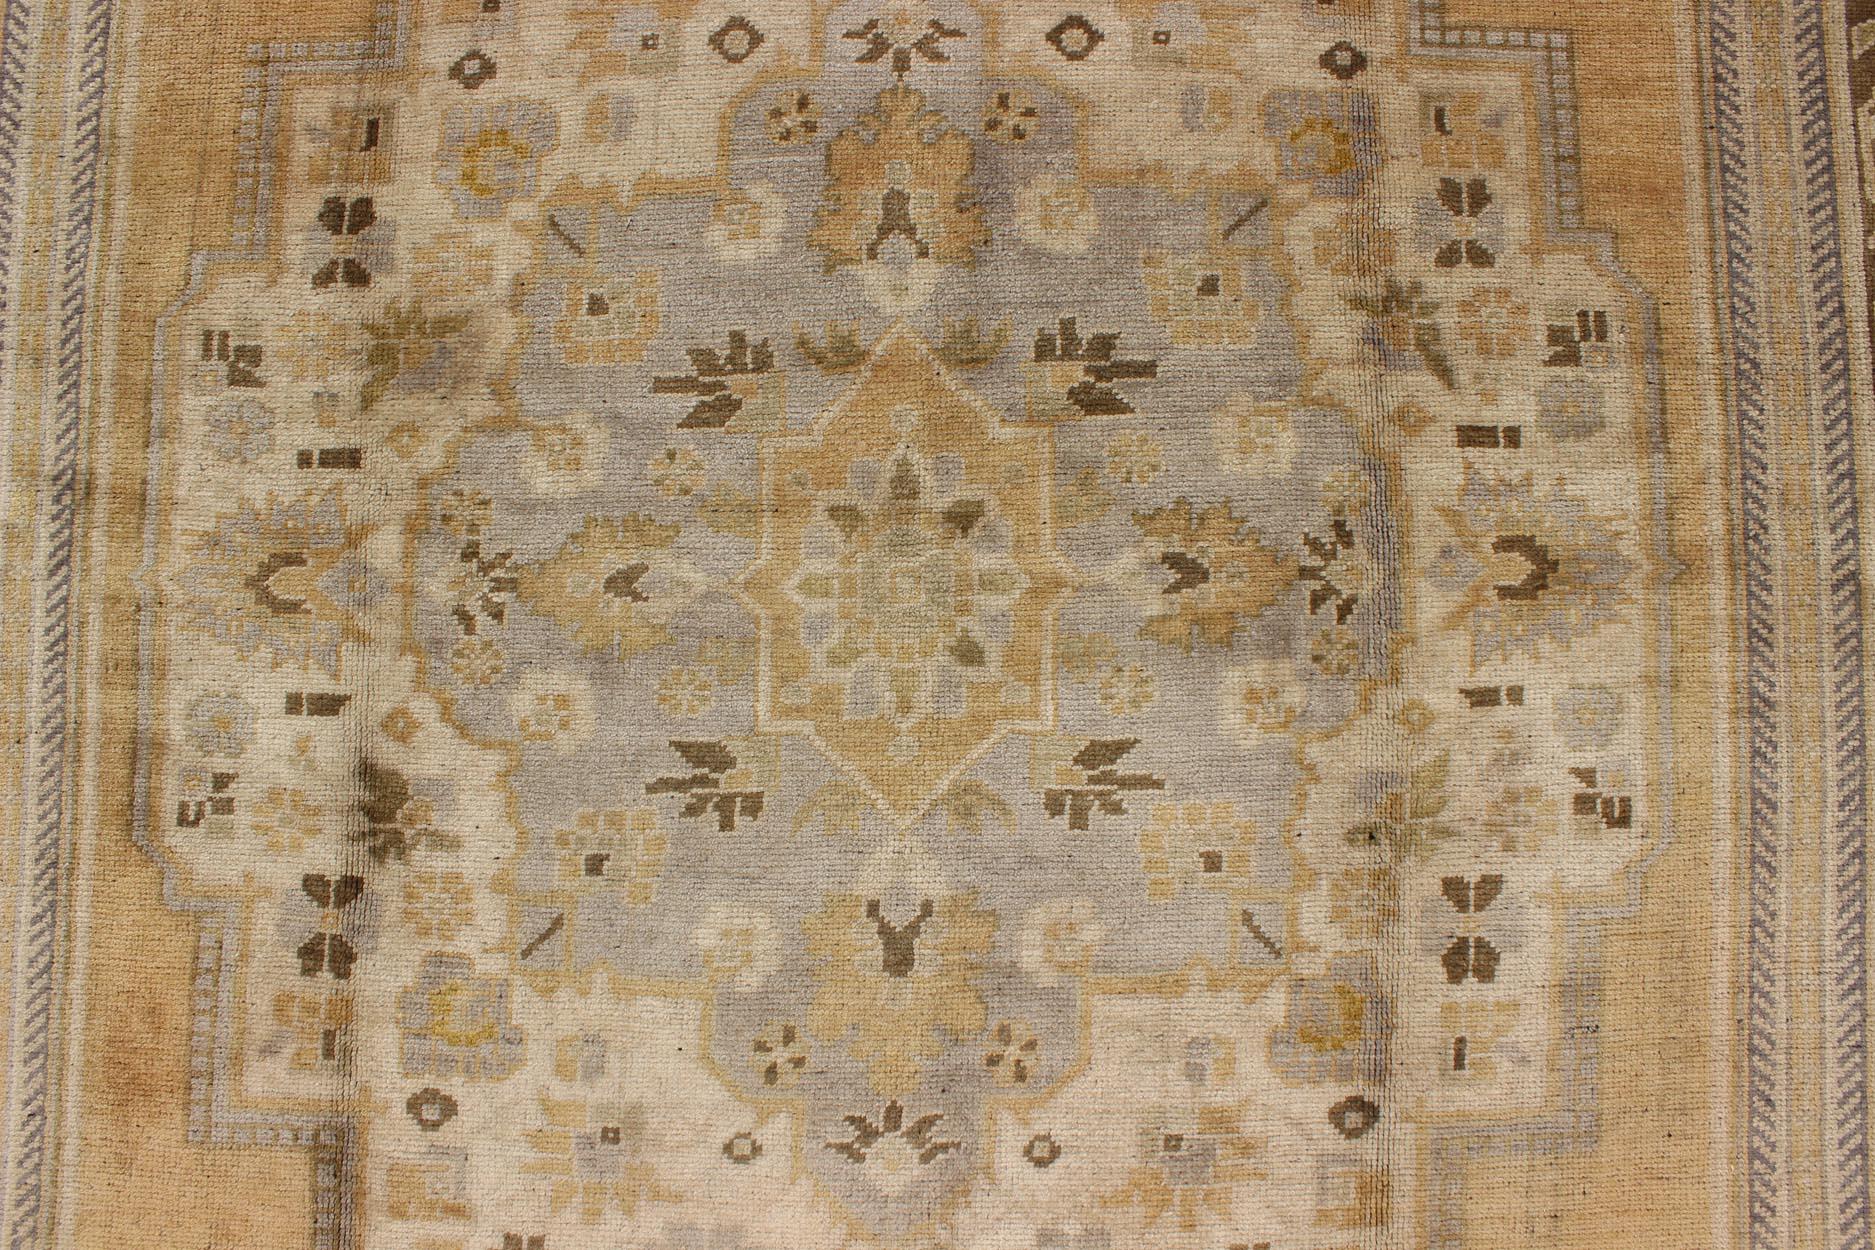 Measures: 6'8 x 12

This vintage Turkish Oushak features a bold design softened by unique, light tones. The border is chocolate brown and contains vines and flowers. Colors include gold, taupe, cocoa, cream, and light blue. 

Country of Origin: